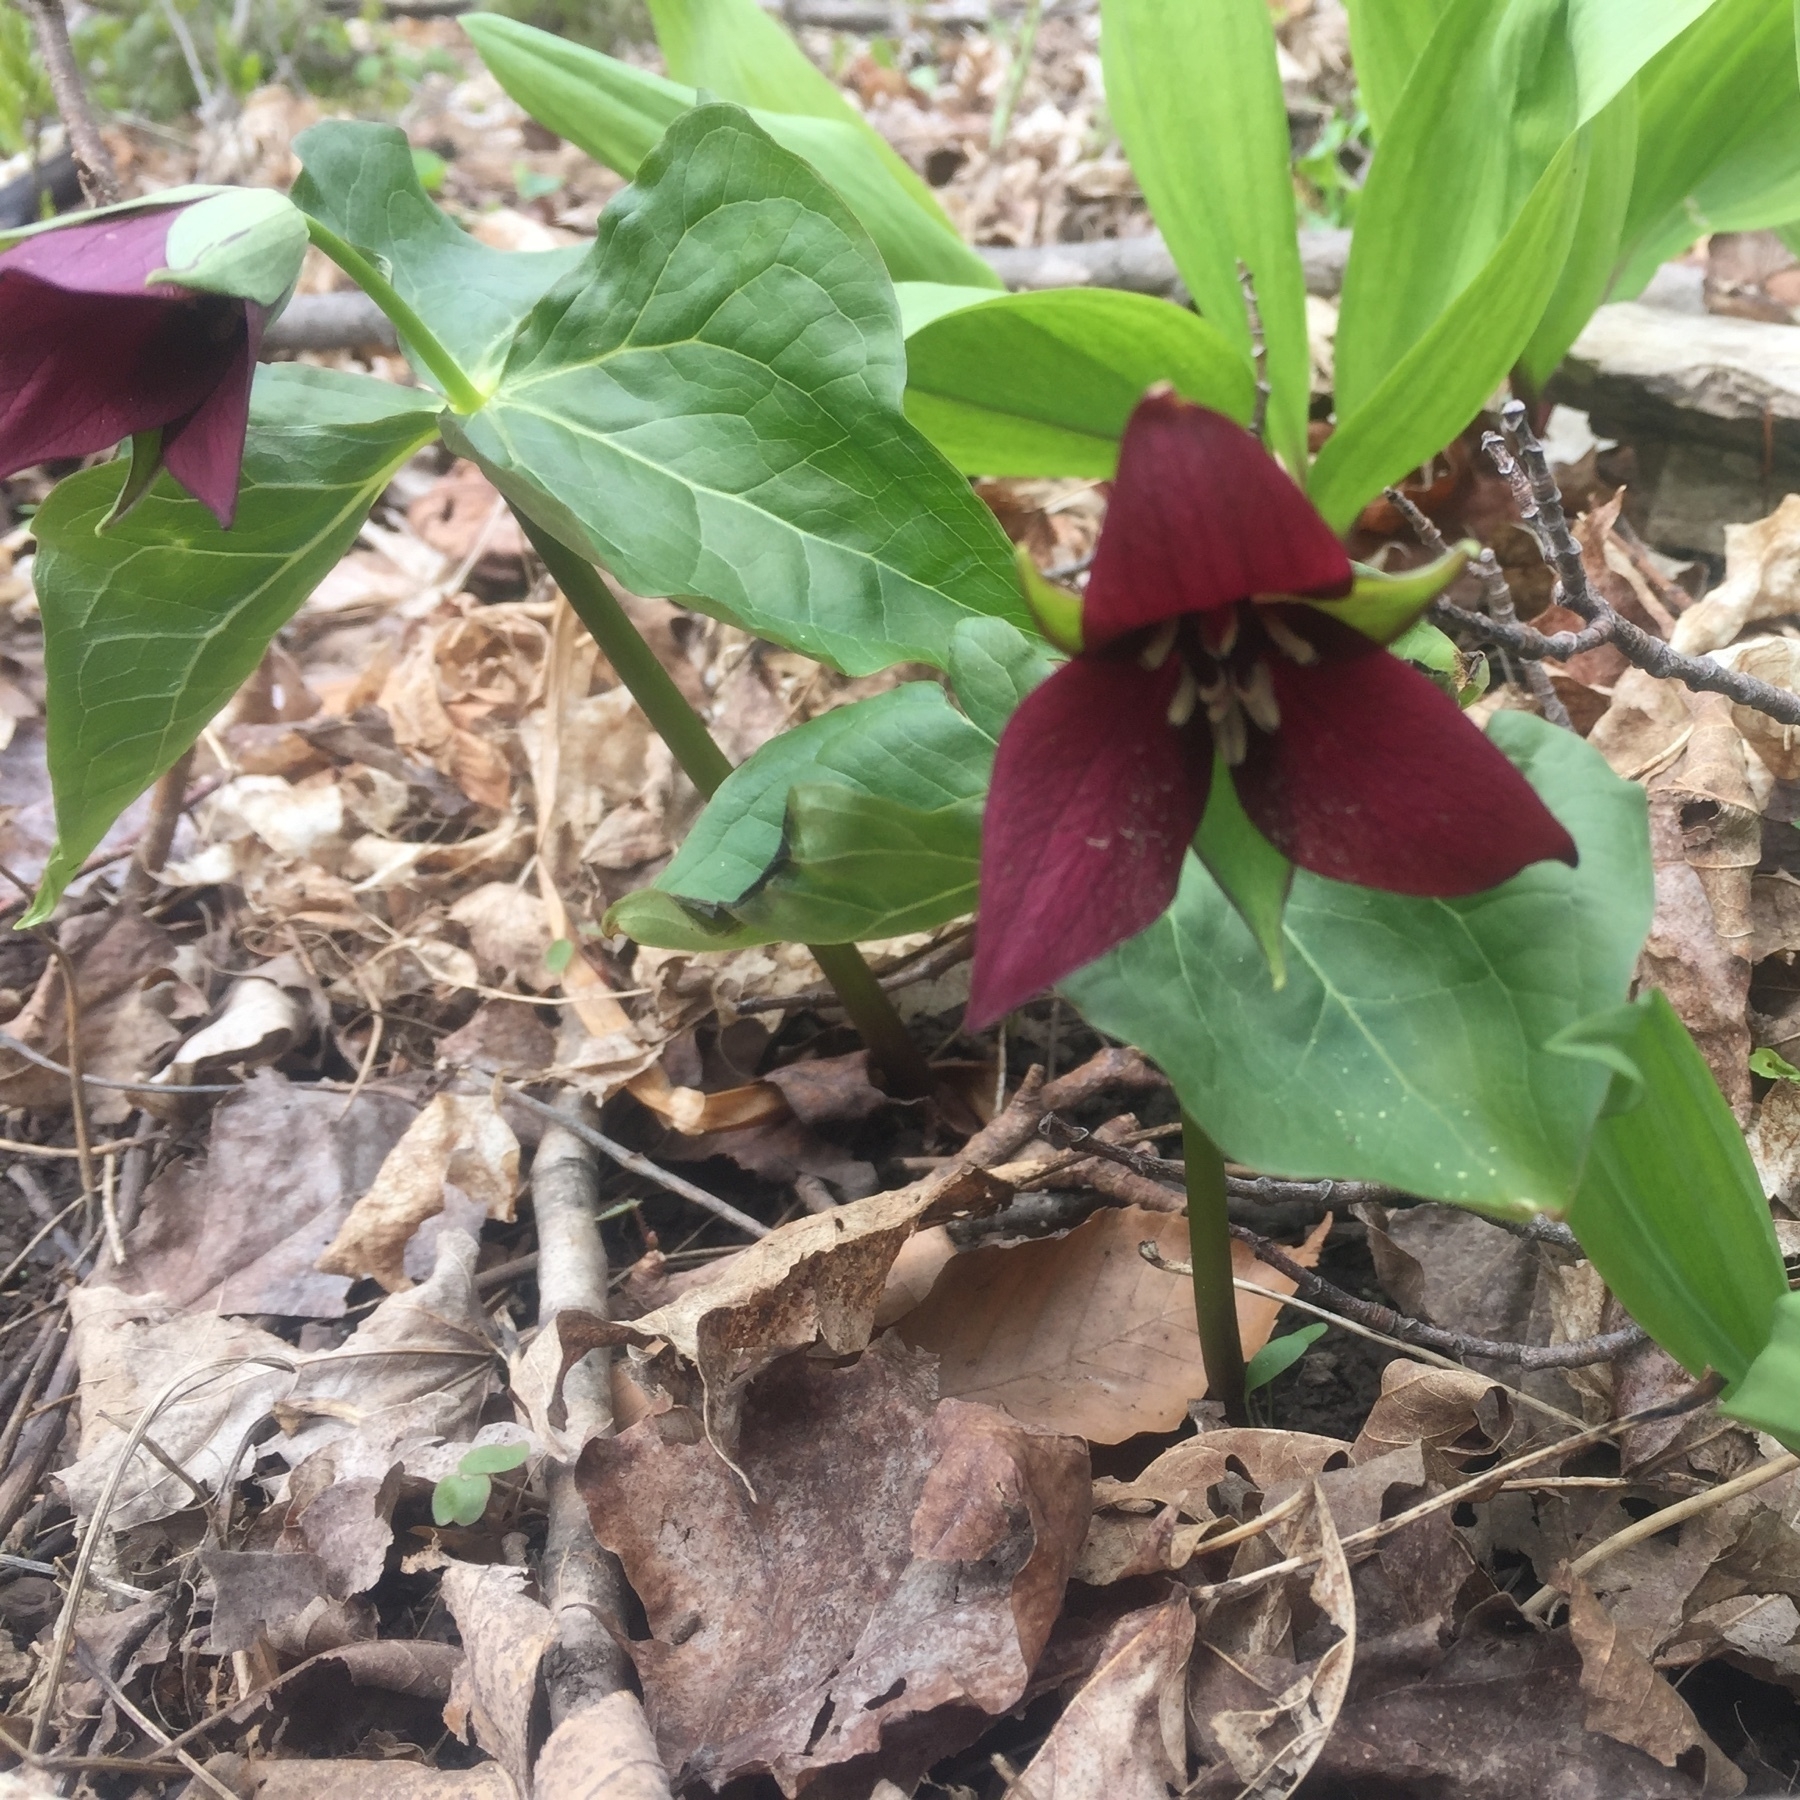 two burgundy trilliums flowering smonst other forest-floor greenery